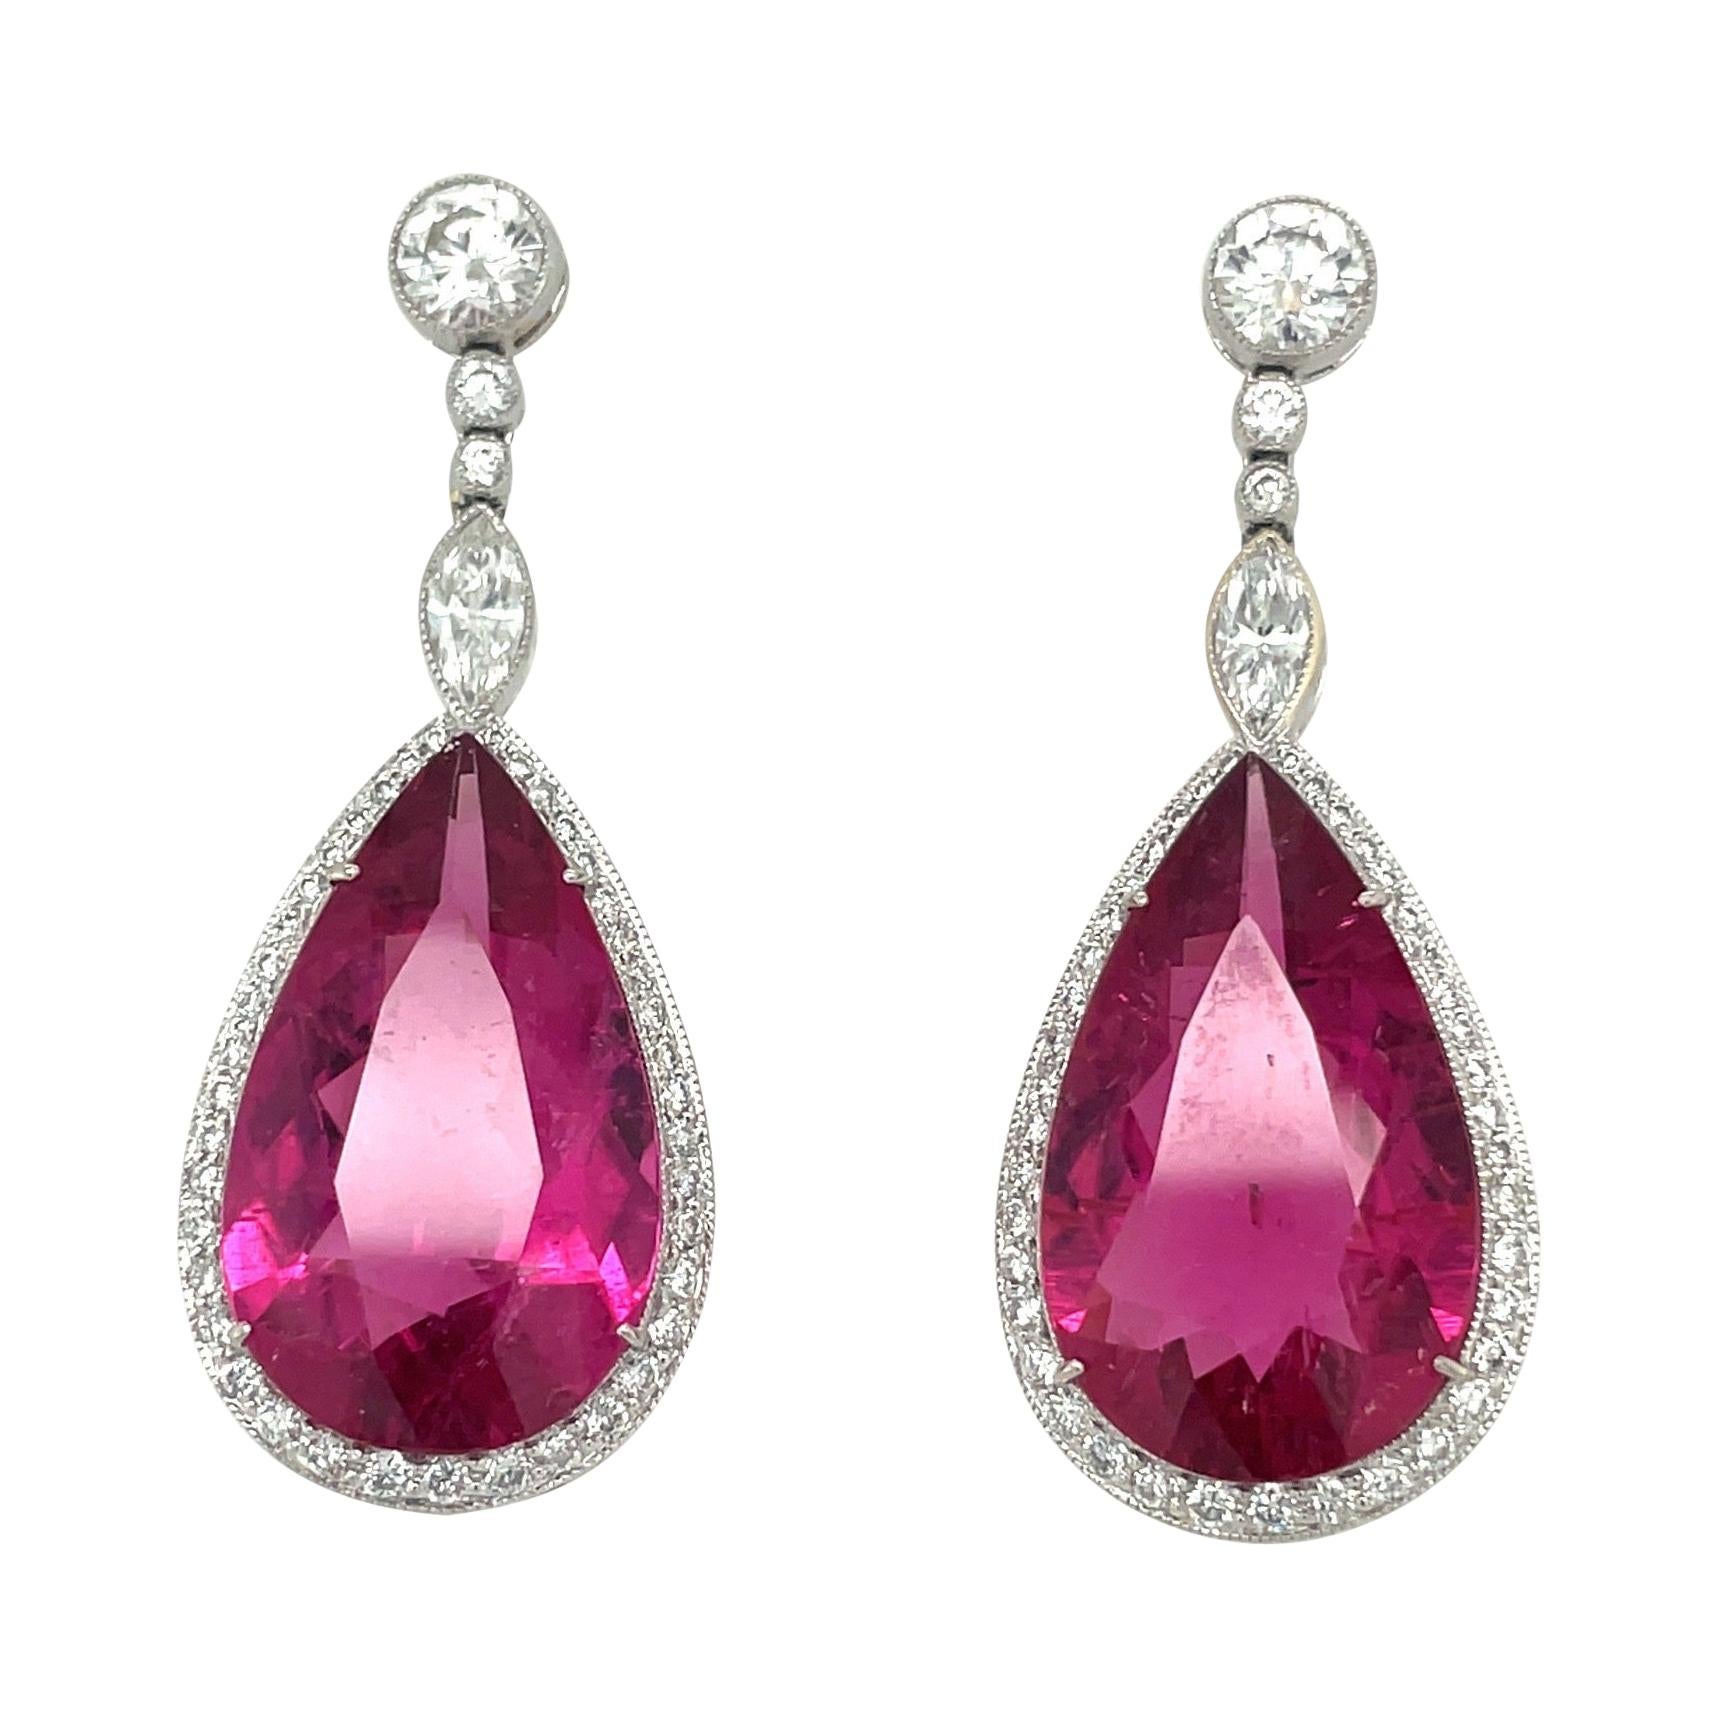 Platinum 22.36ct. Pear Shaped Rubellite Drop Earrings with 1.83ct. Diamonds